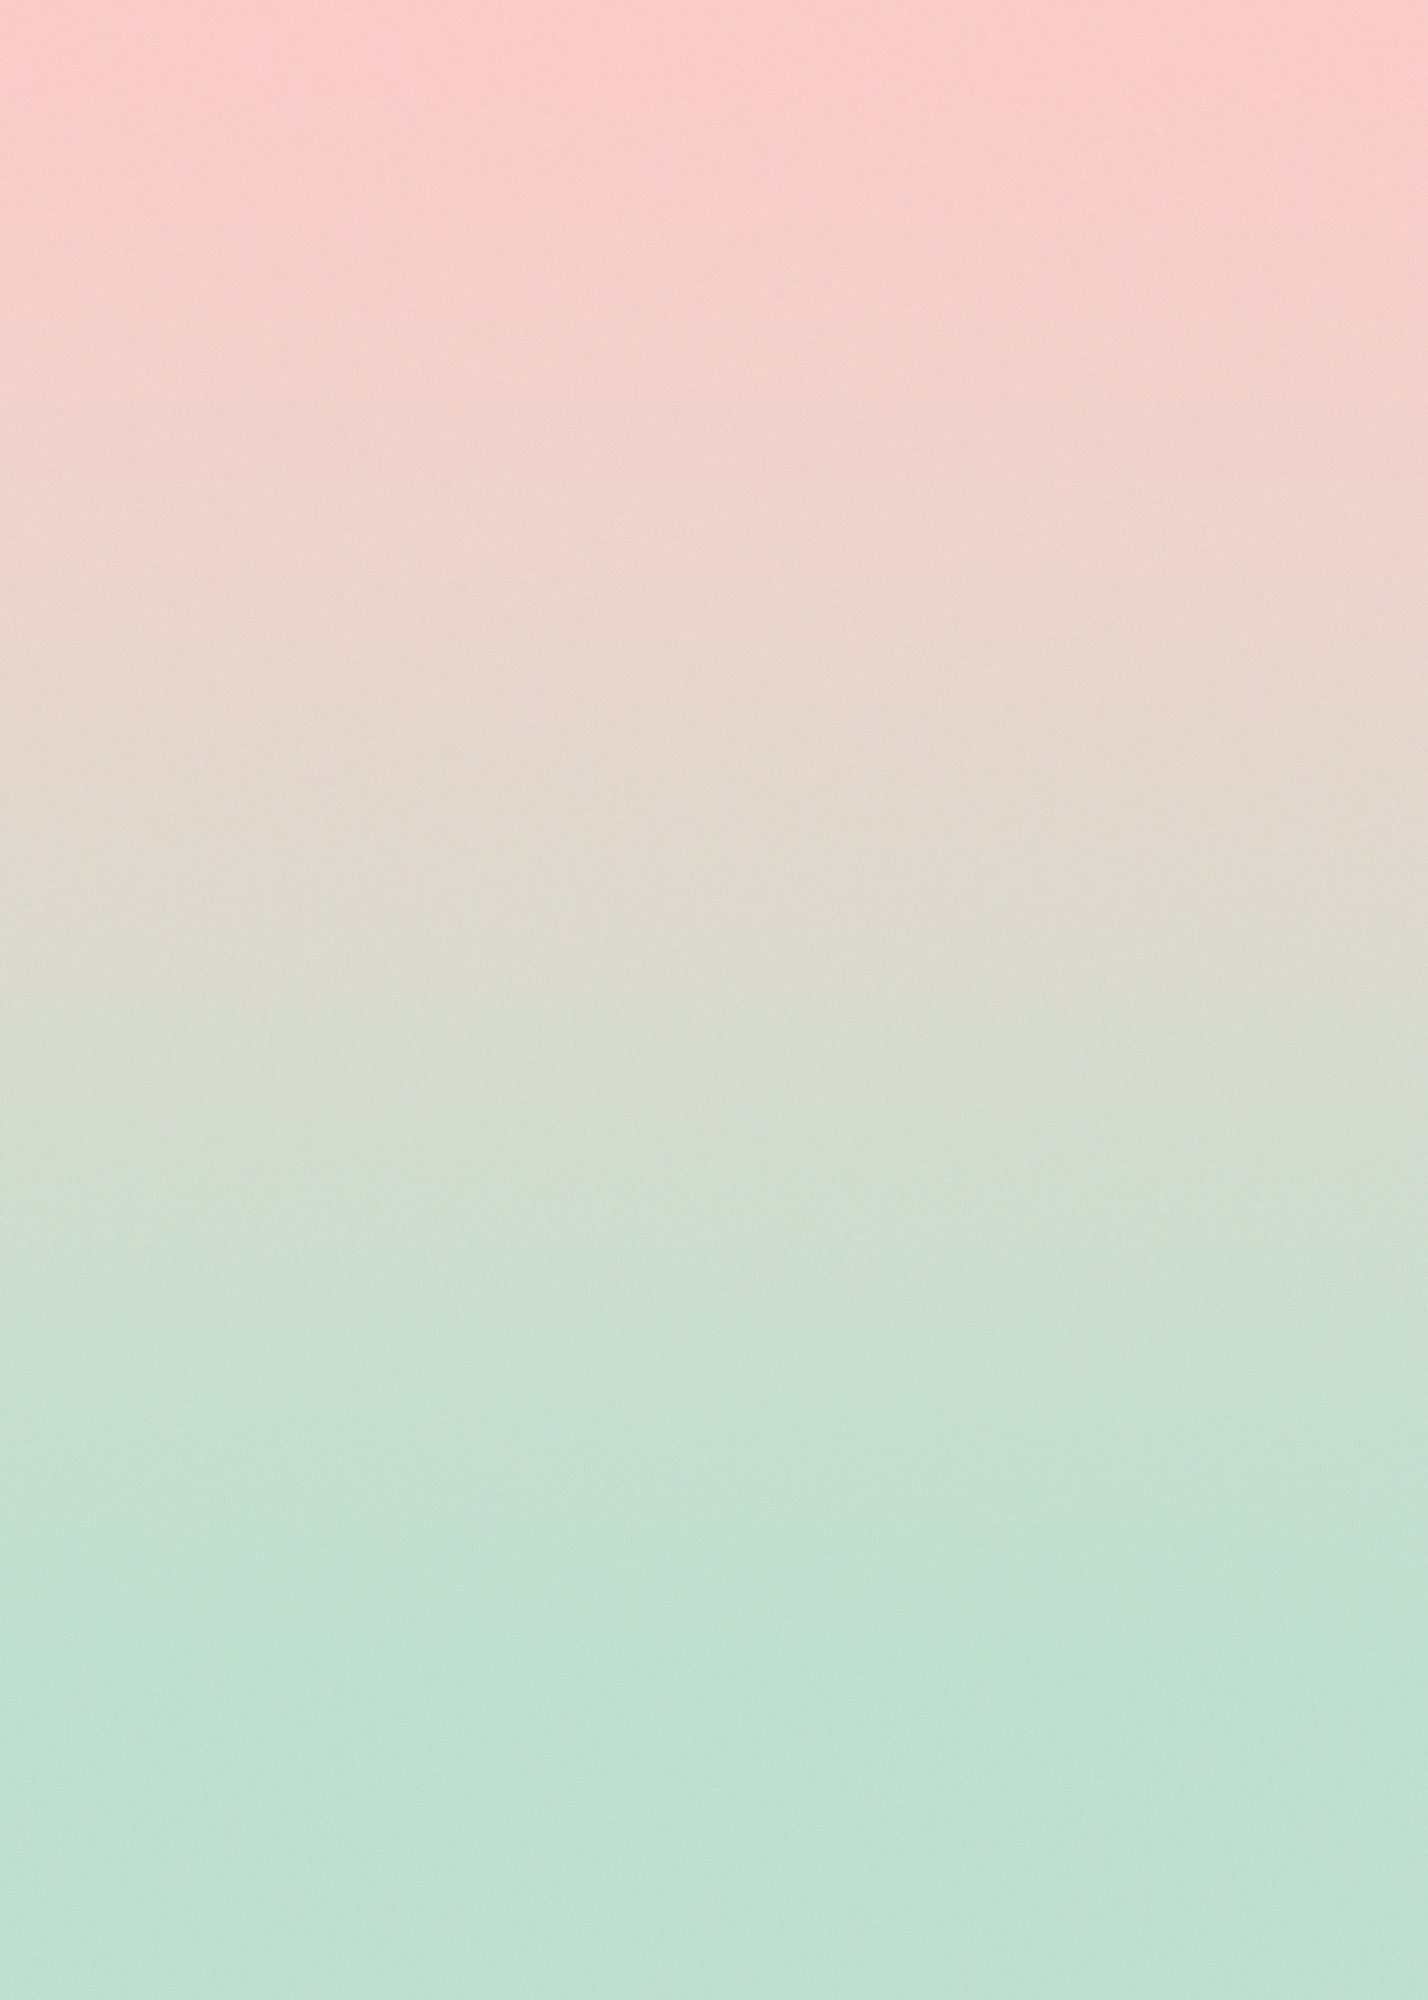 mint and pink color wallpaper